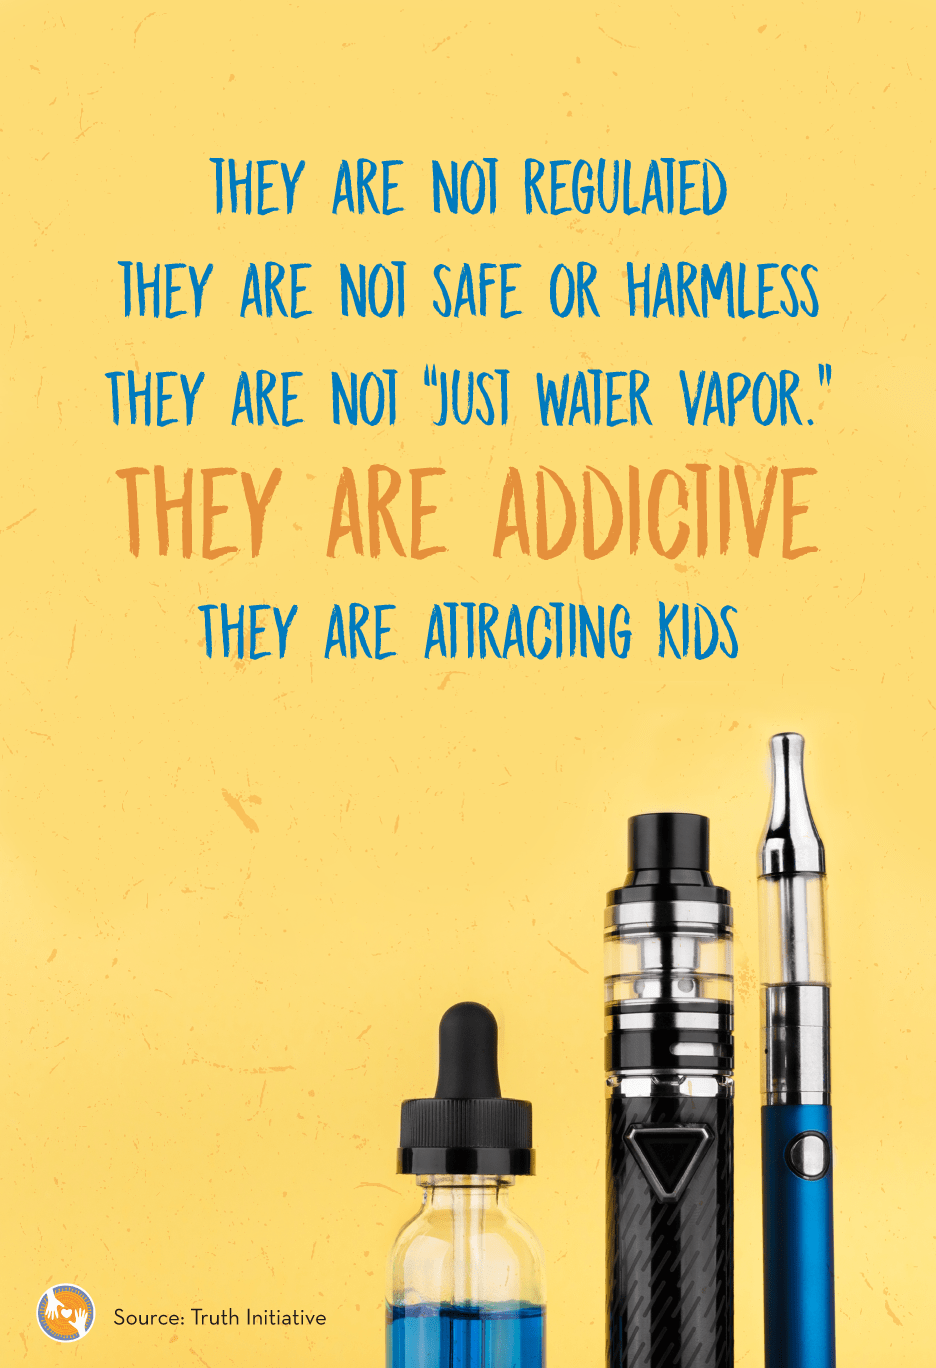 Unidos Por Salud poster: "They are addictive: They Are Attracting Kids"